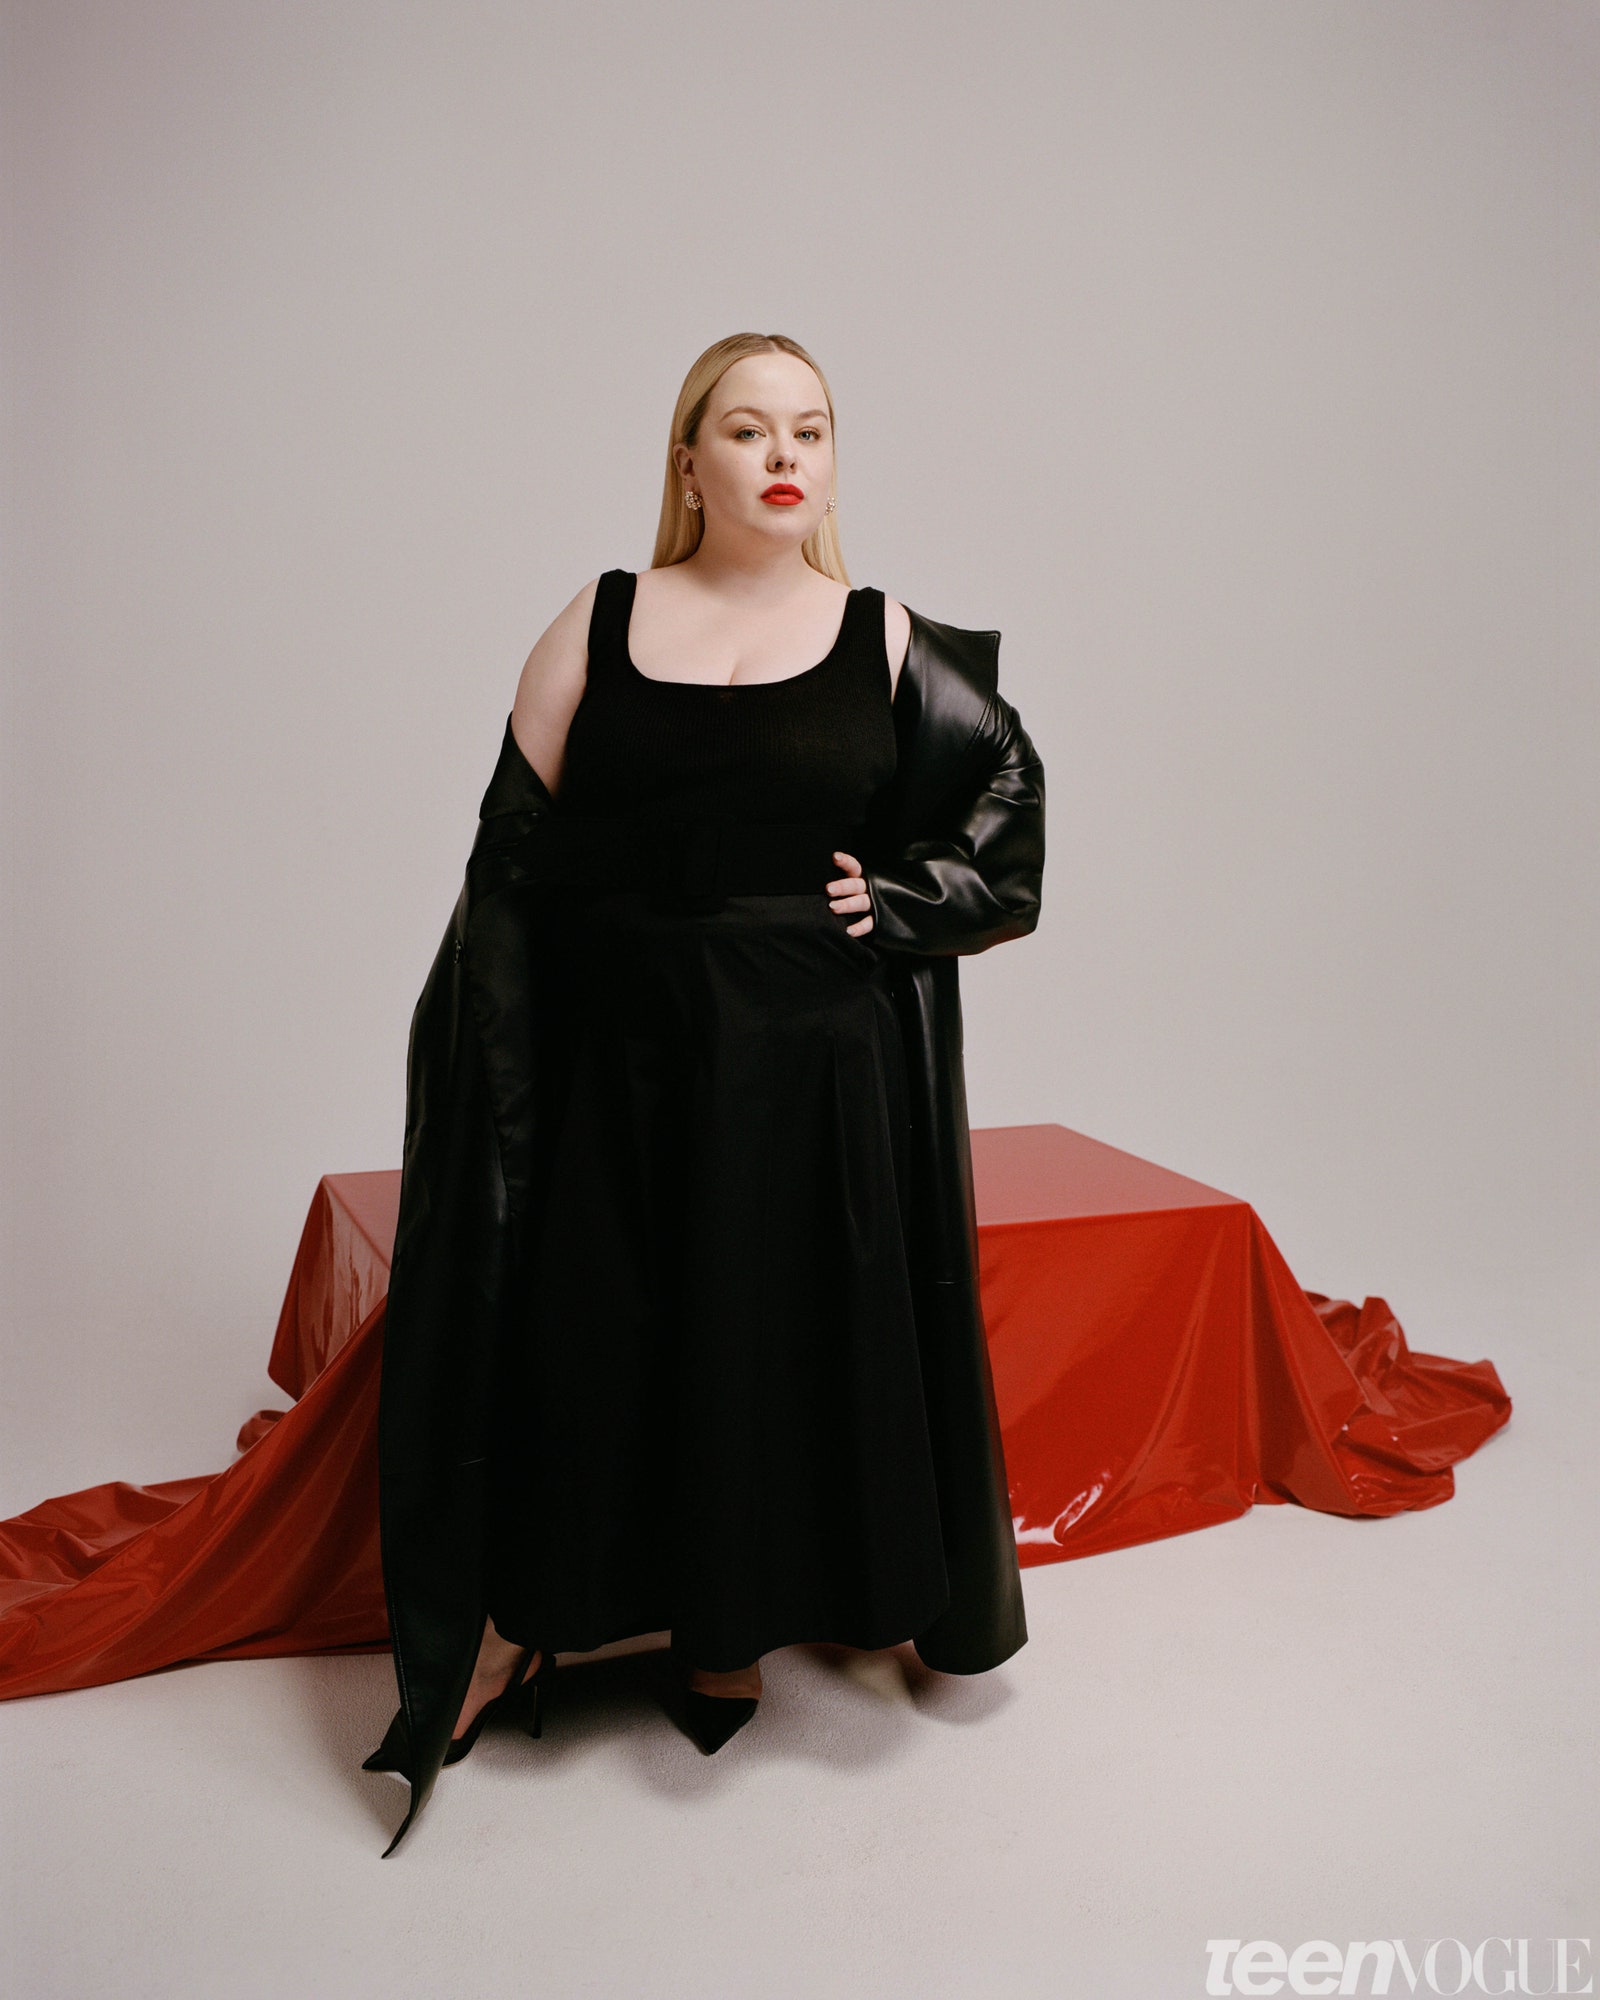 Nicola Coughlan in a black dress near red clothed box on the ground